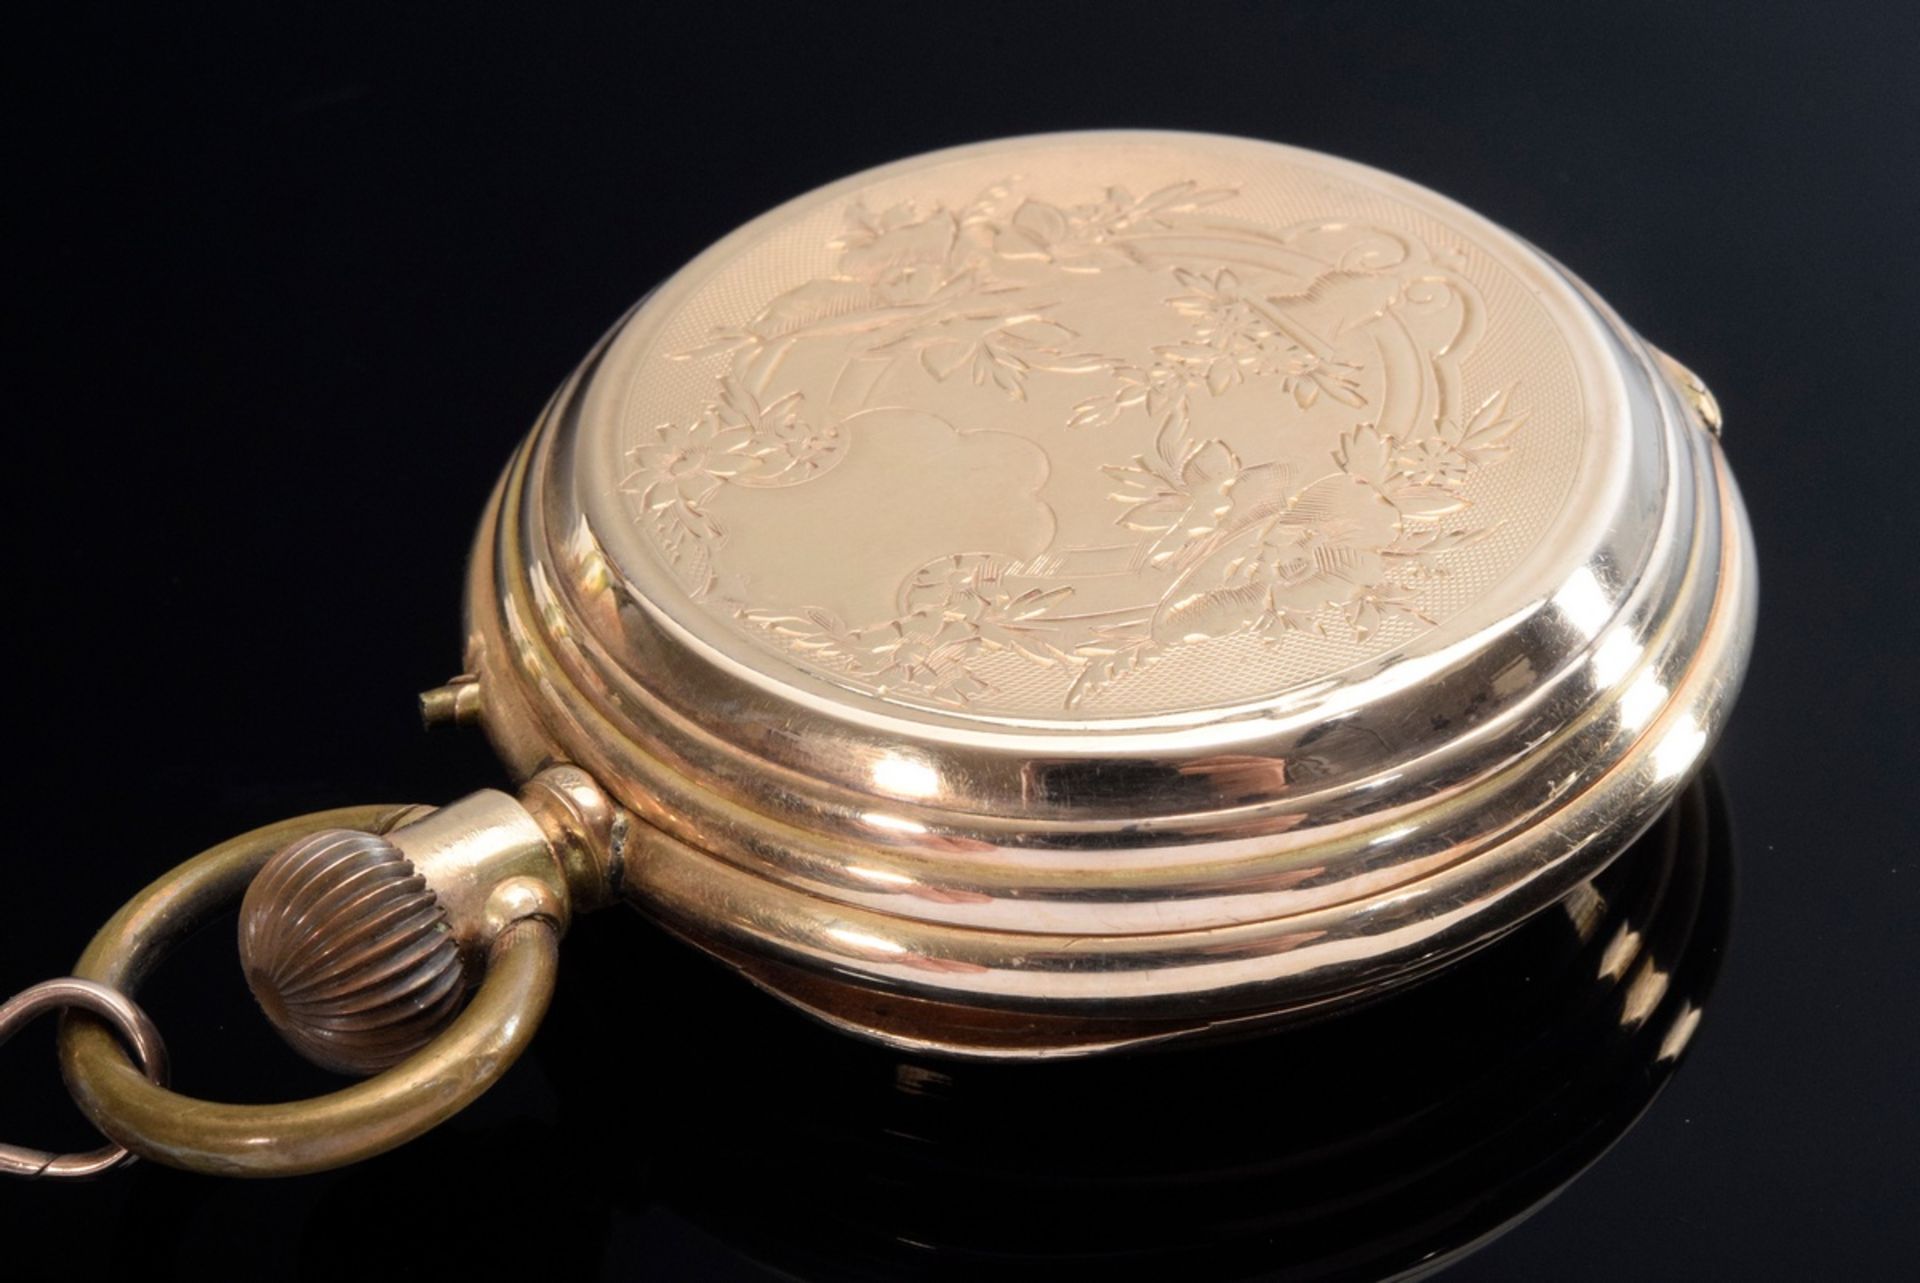 Pocket watch, triple cover RG 585, Monard Geneve, Rementoir, lever movement, 15 synth. ruby jewels, - Image 3 of 7